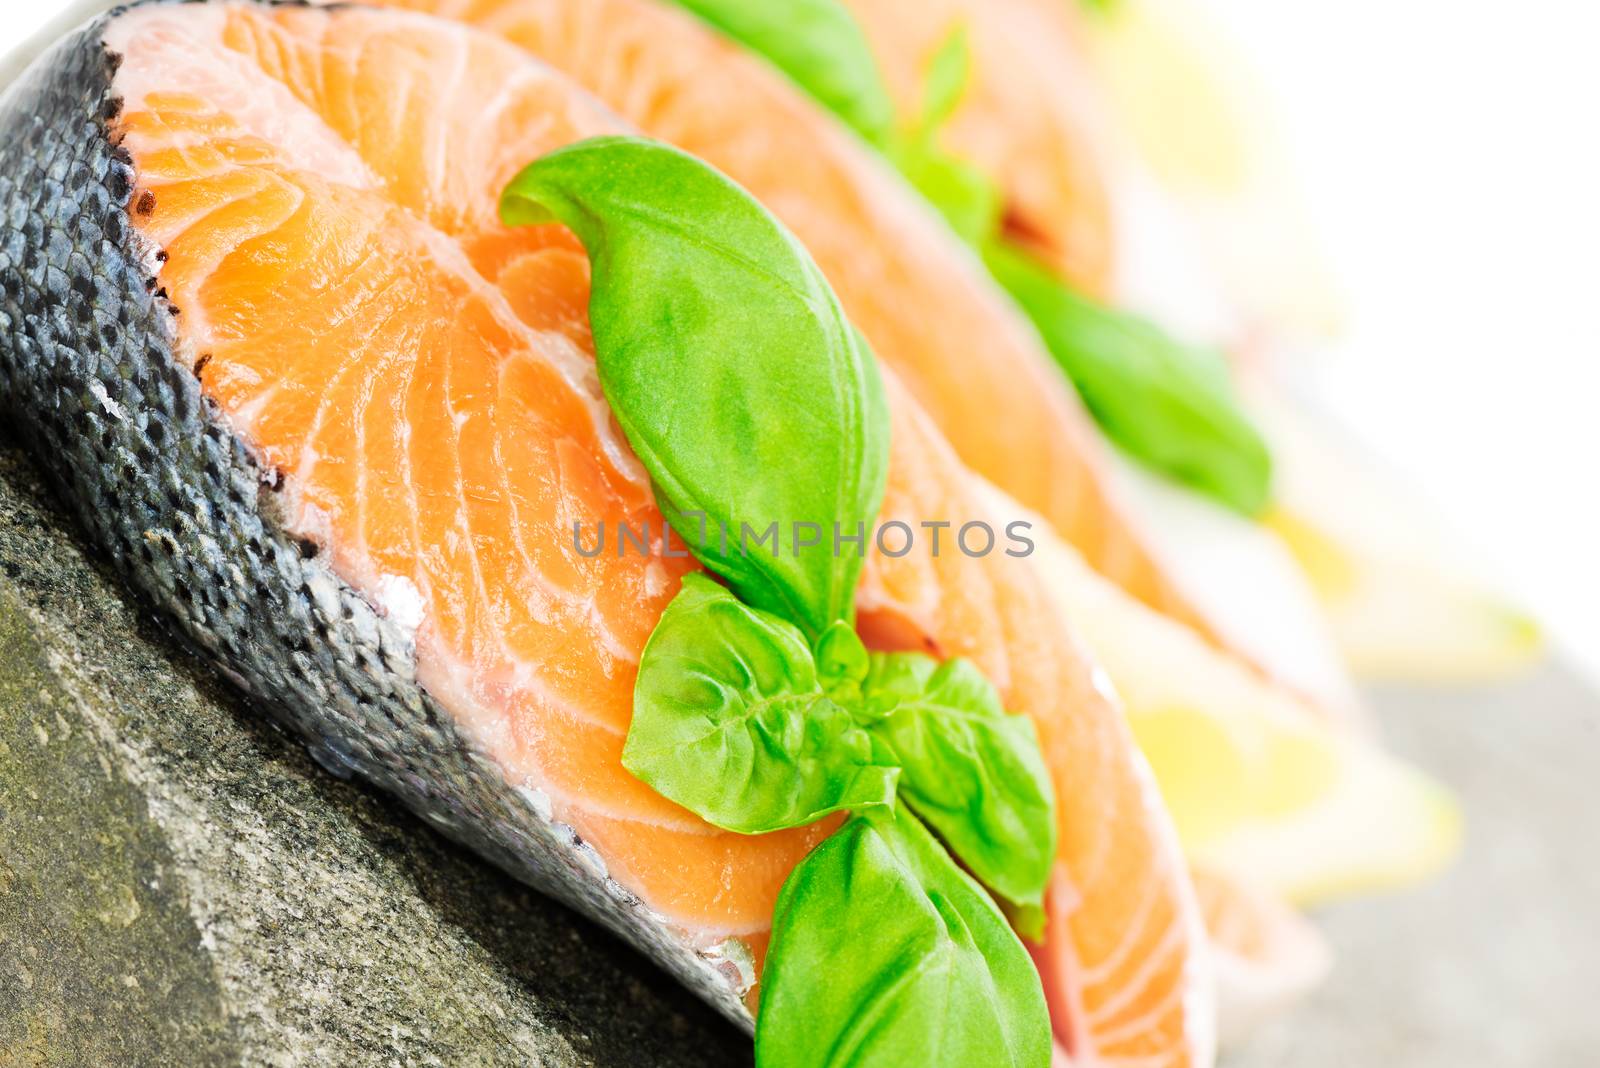 Salmon cuts on stone with basil and lemon